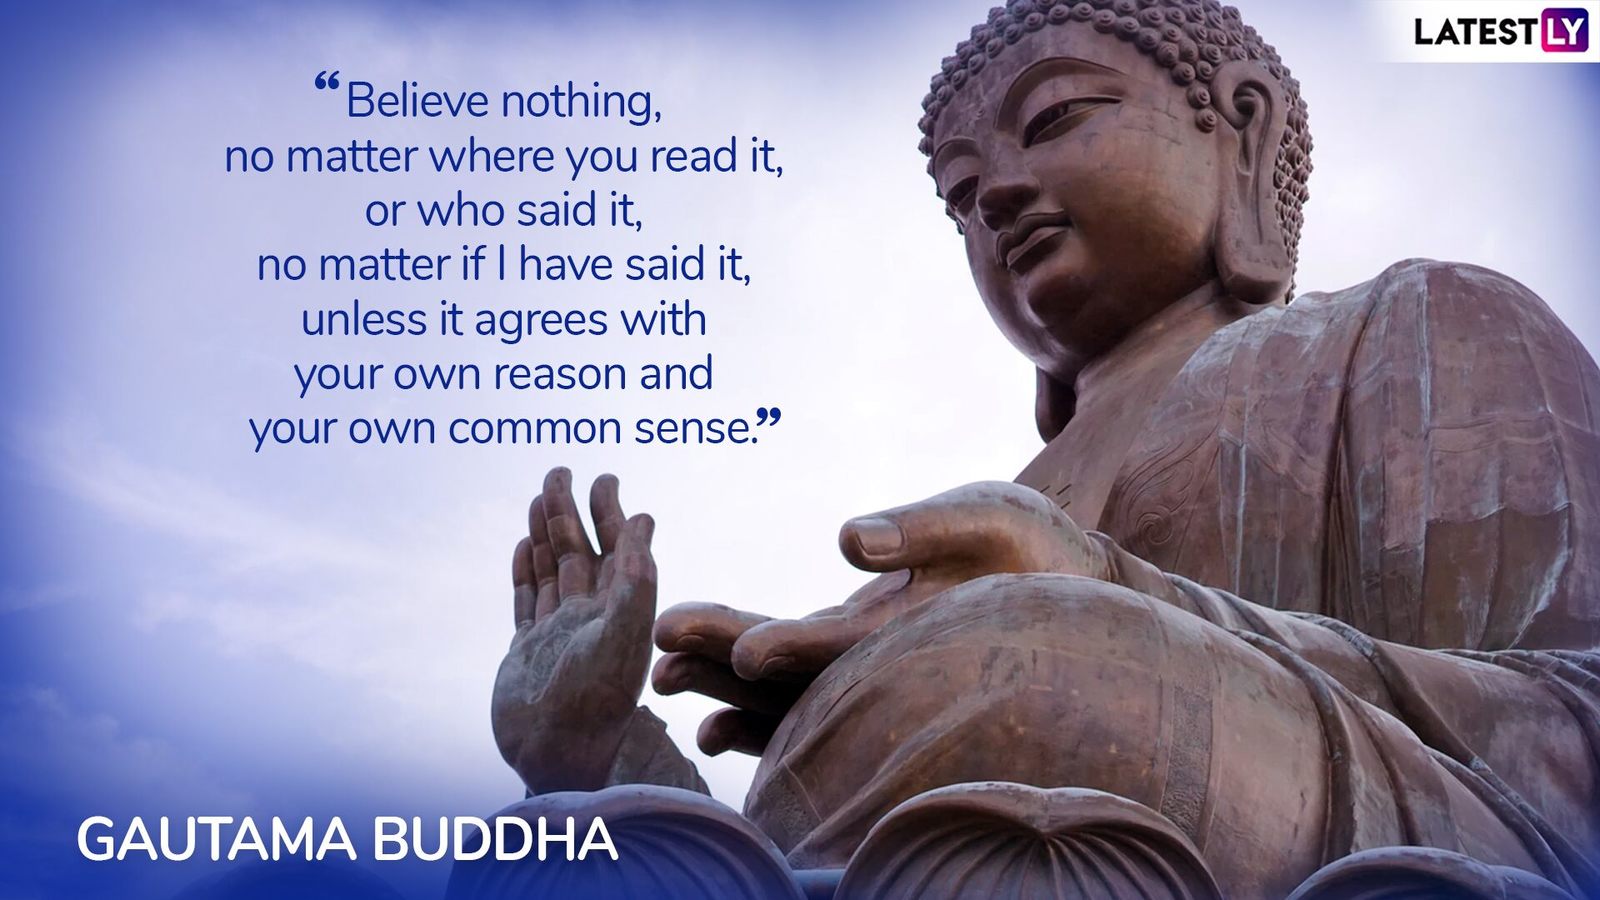 9-quotes-and-messages-share-these-inspirational-teachings-by-lord-buddha-to-celebrate-latestly-4.jpg